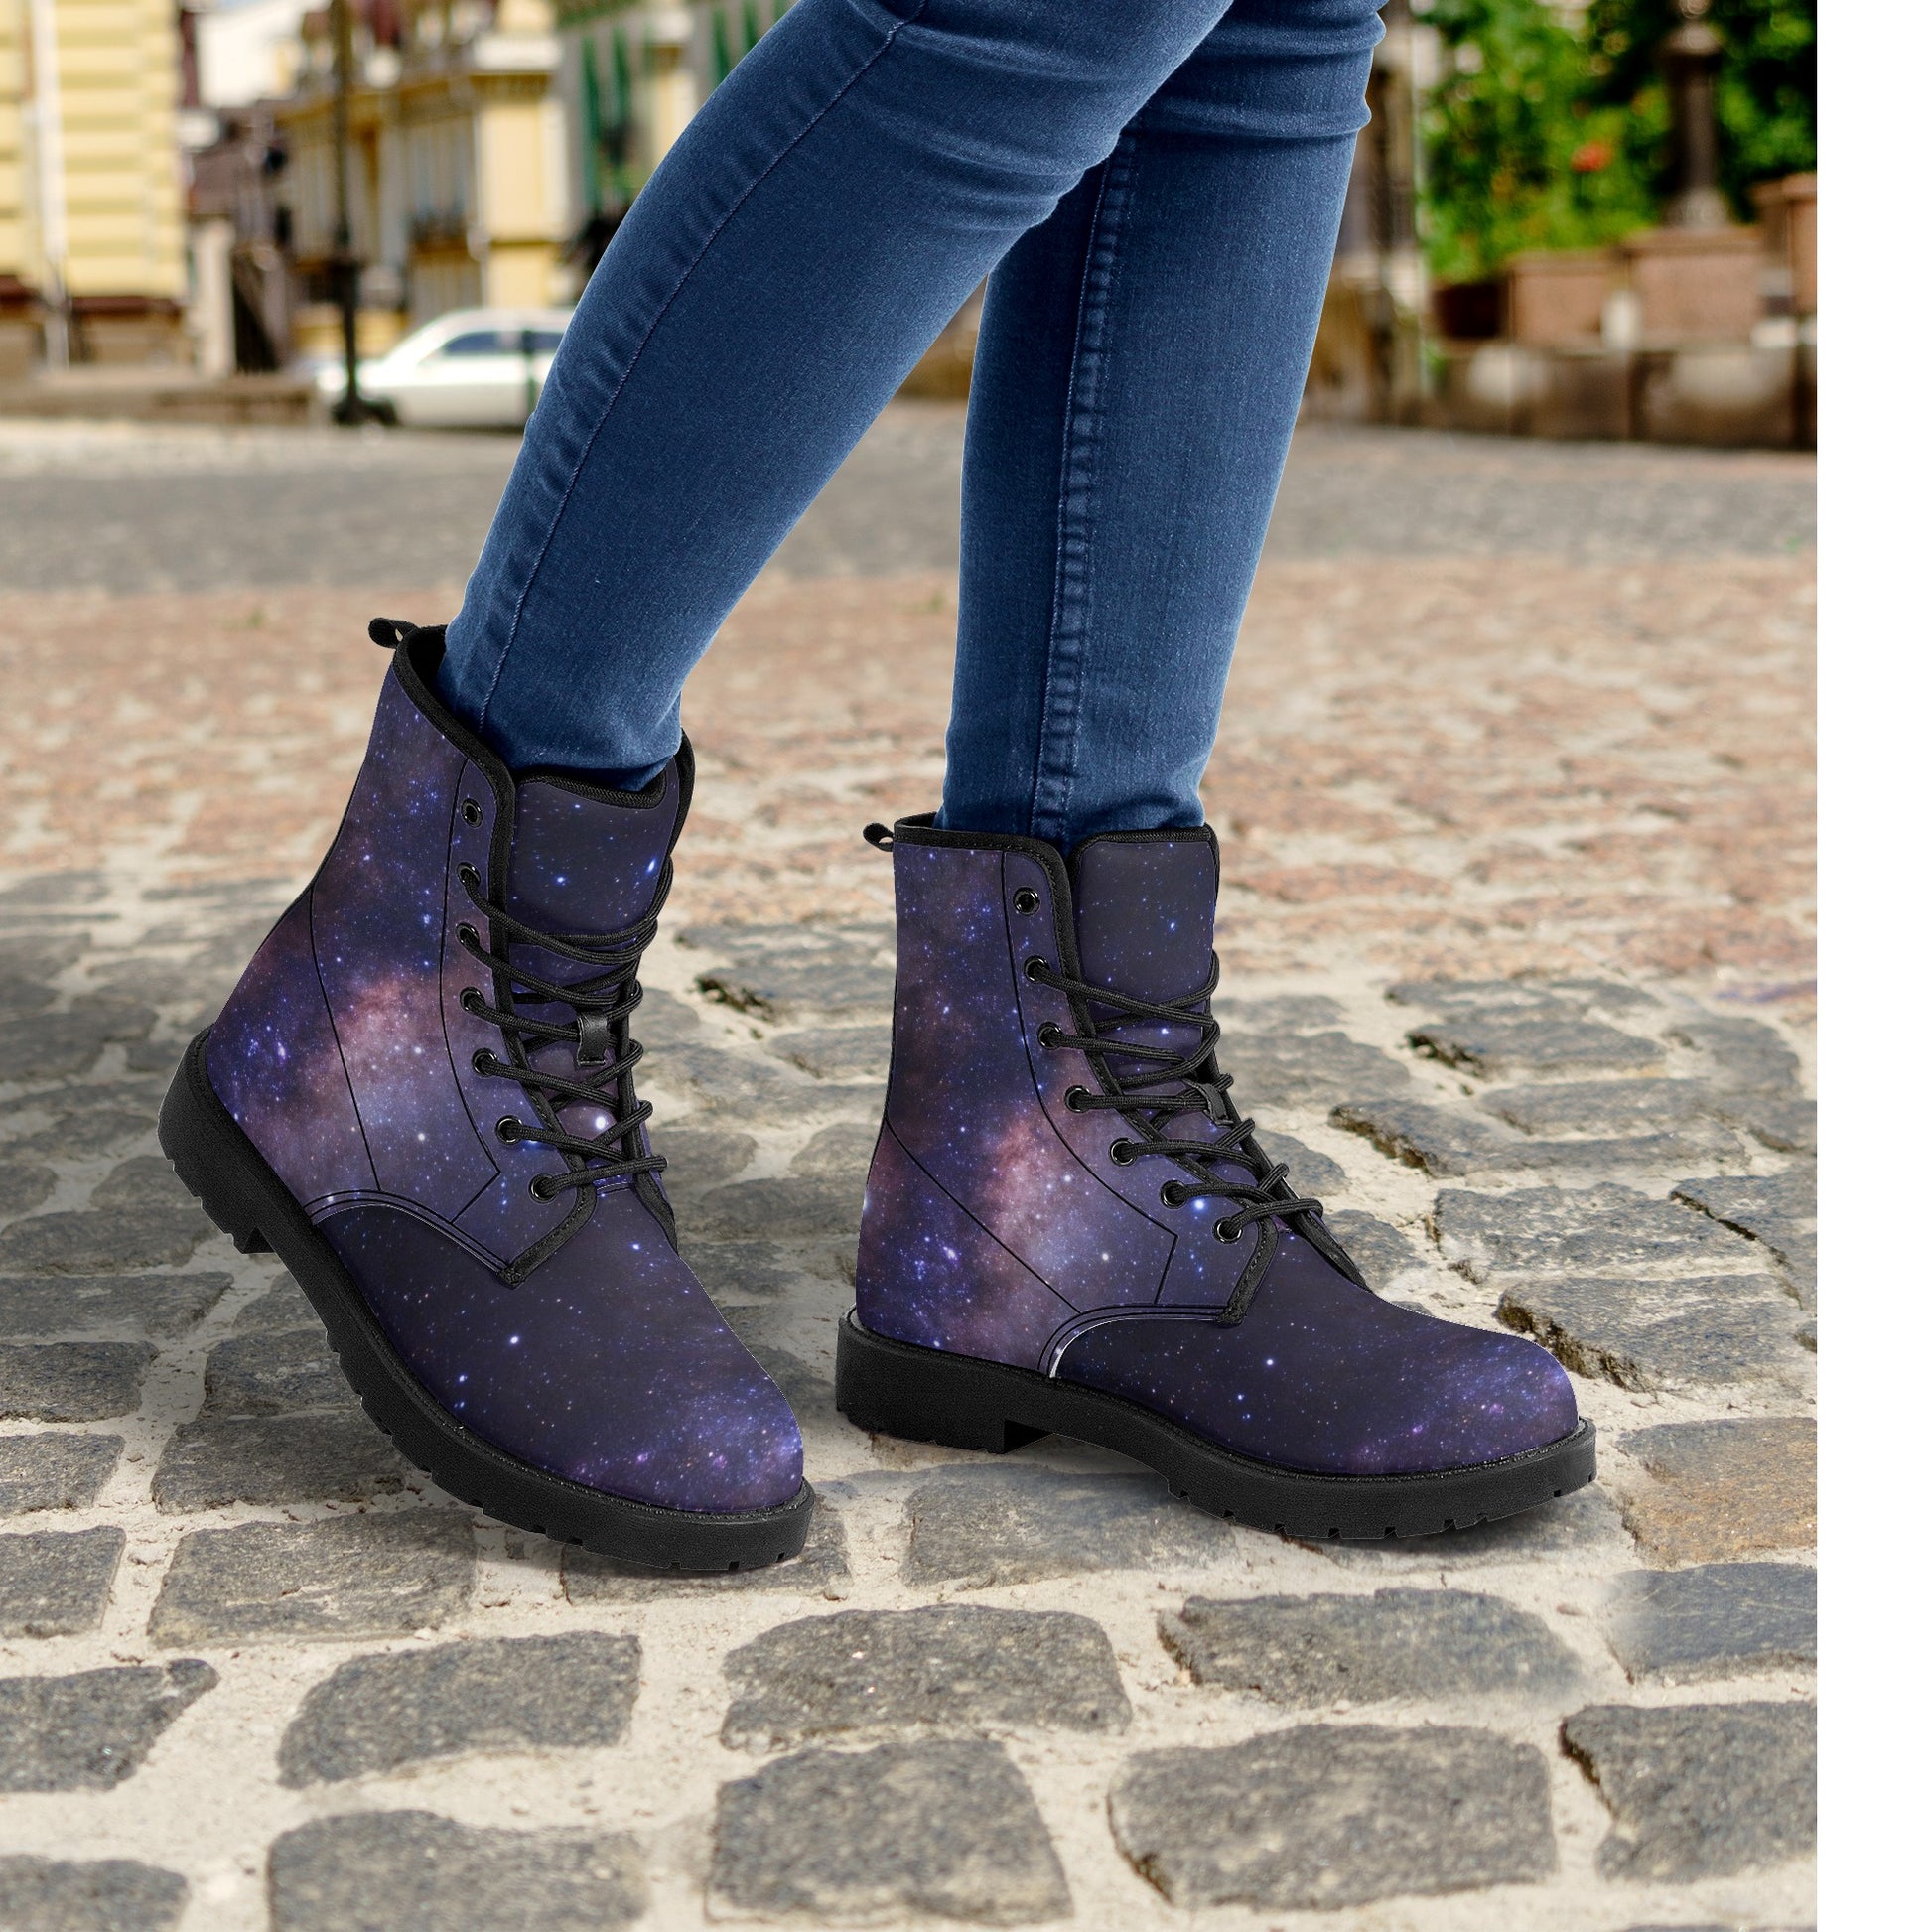 Galaxy Women Leather Boots, Outer Space Lace Up Shoes Hiking Festival Black Ankle Combat Vegan Winter Casual Custom Gift Starcove Fashion